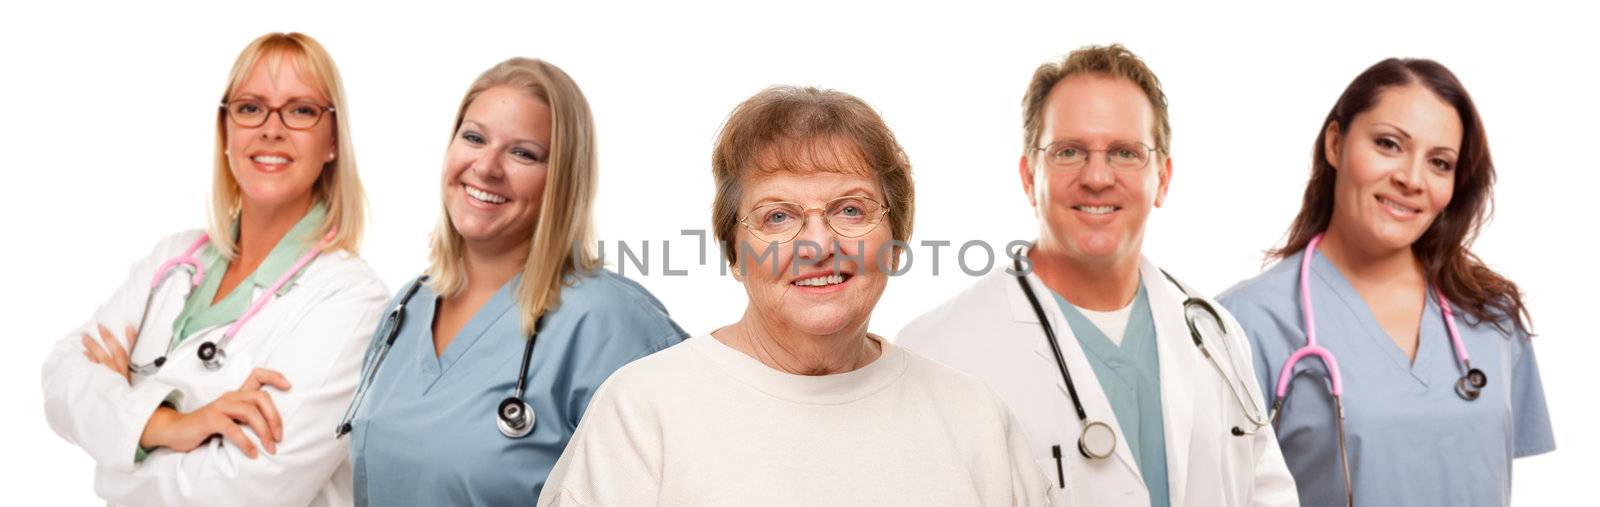 Smiling Senior Woman with Medical Doctors and Nurses Behind by Feverpitched